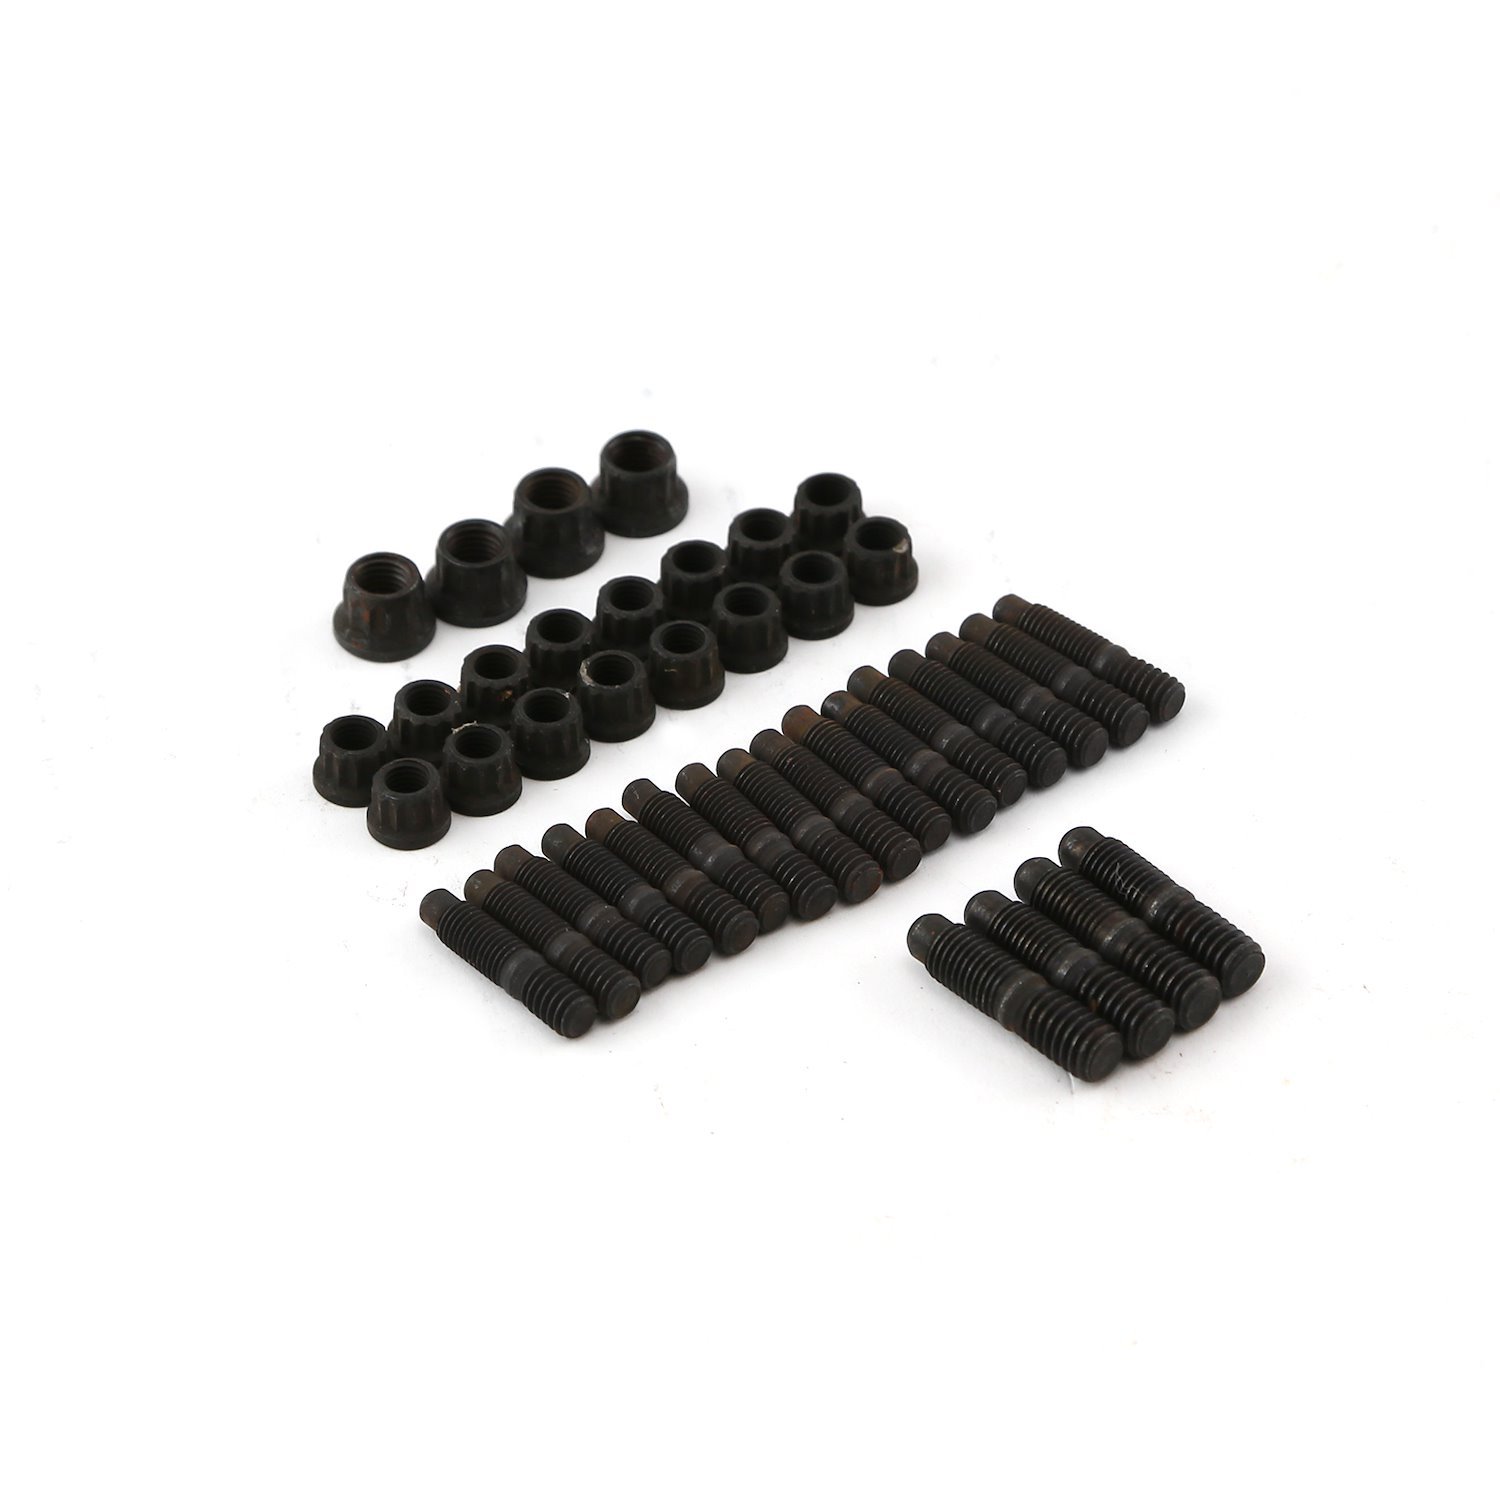 Oil Pan Stud Kit 12-Point, 5/16 in.-18 and 1/4 in.-20